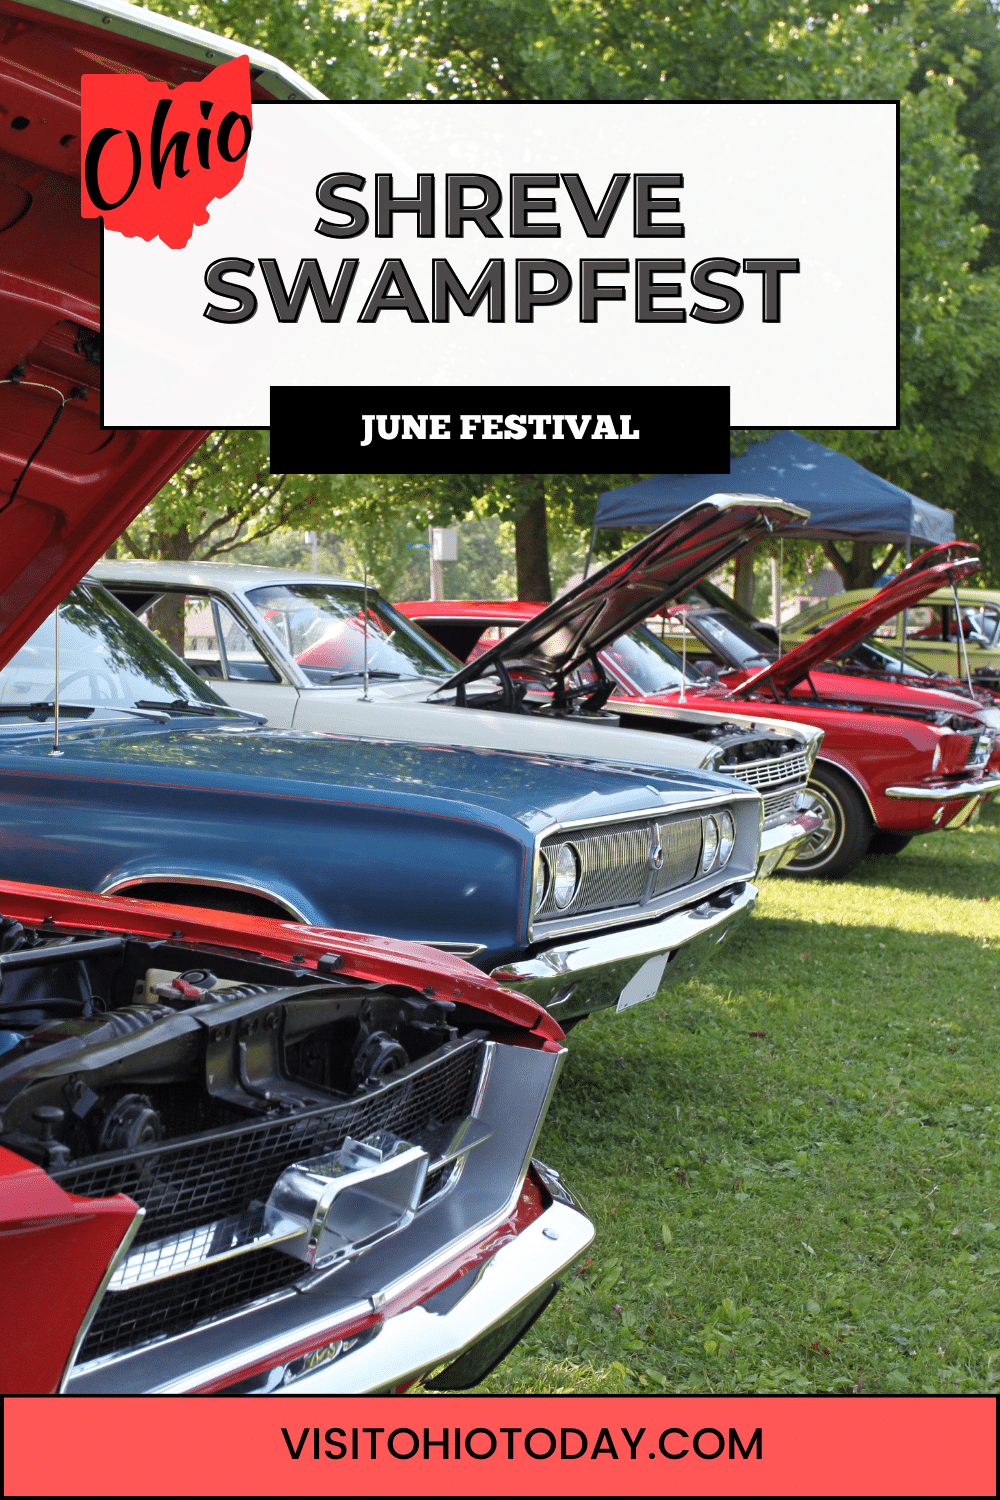 Shreve Swampfest is a community festival that takes place in downtown Shreve in mid-June.